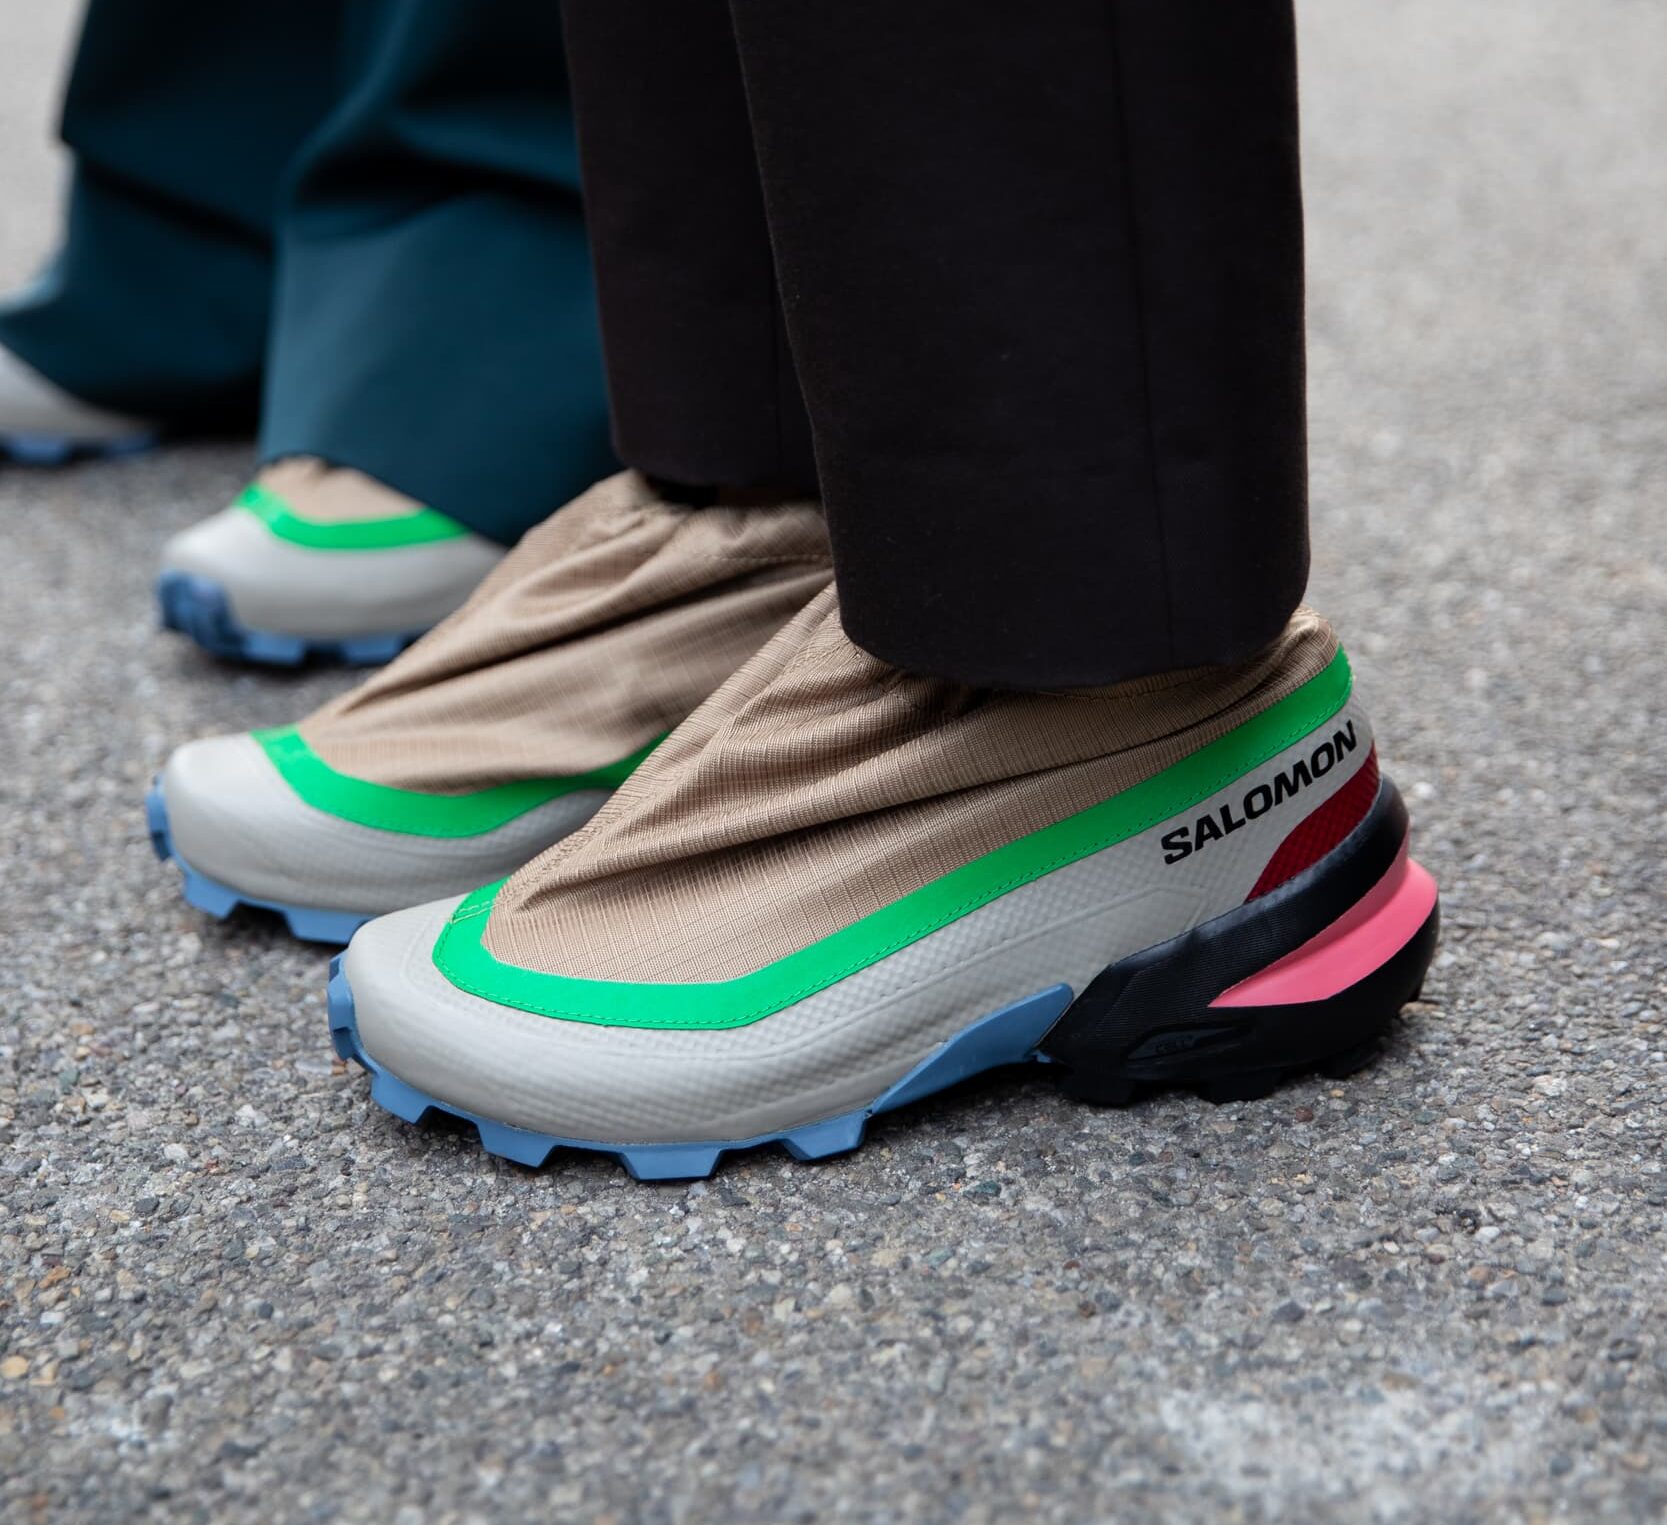 MM6 Maison Margiela collabs with Salomon on a striking new shoe